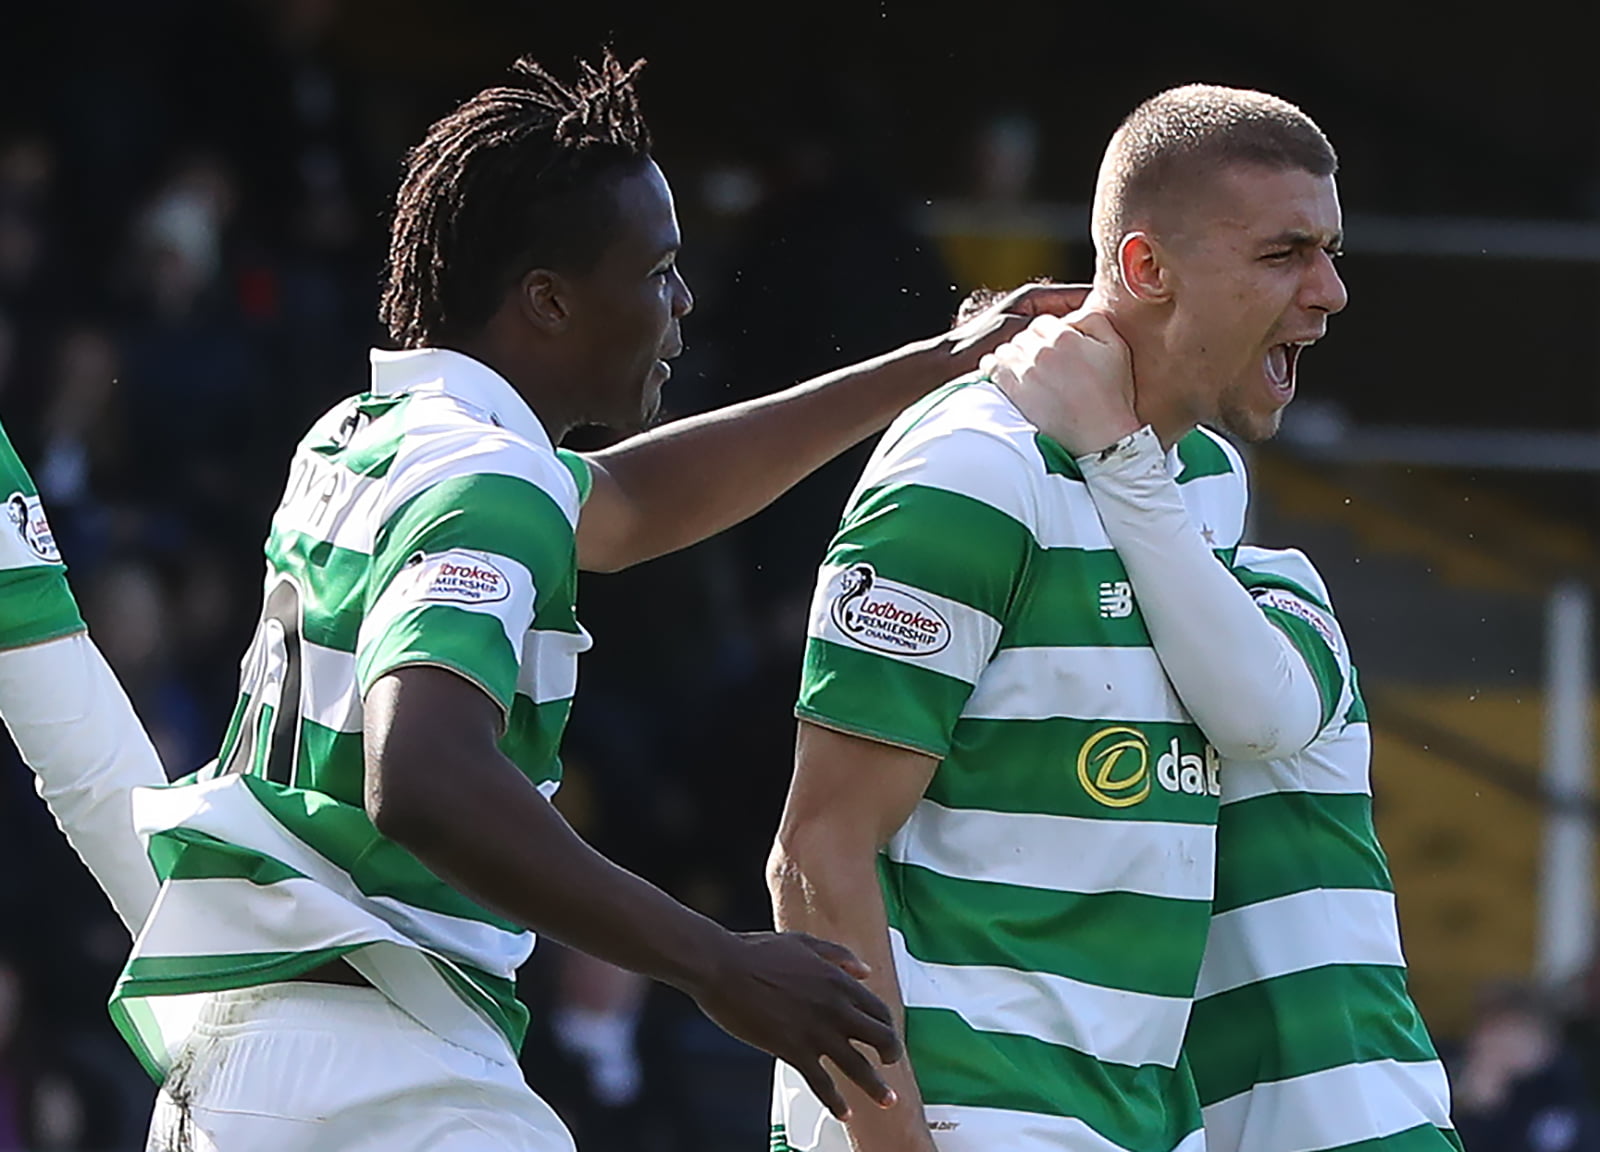 Jozo Simunovic of Celtic  celebrates after he scores during the Ladbrokes Scottish Premiership match between Dundee and Celtic at Dens Park Stadium on March 19, 2017 in Dundee, Scotland. (Photo by Ian MacNicol/Getty Images)